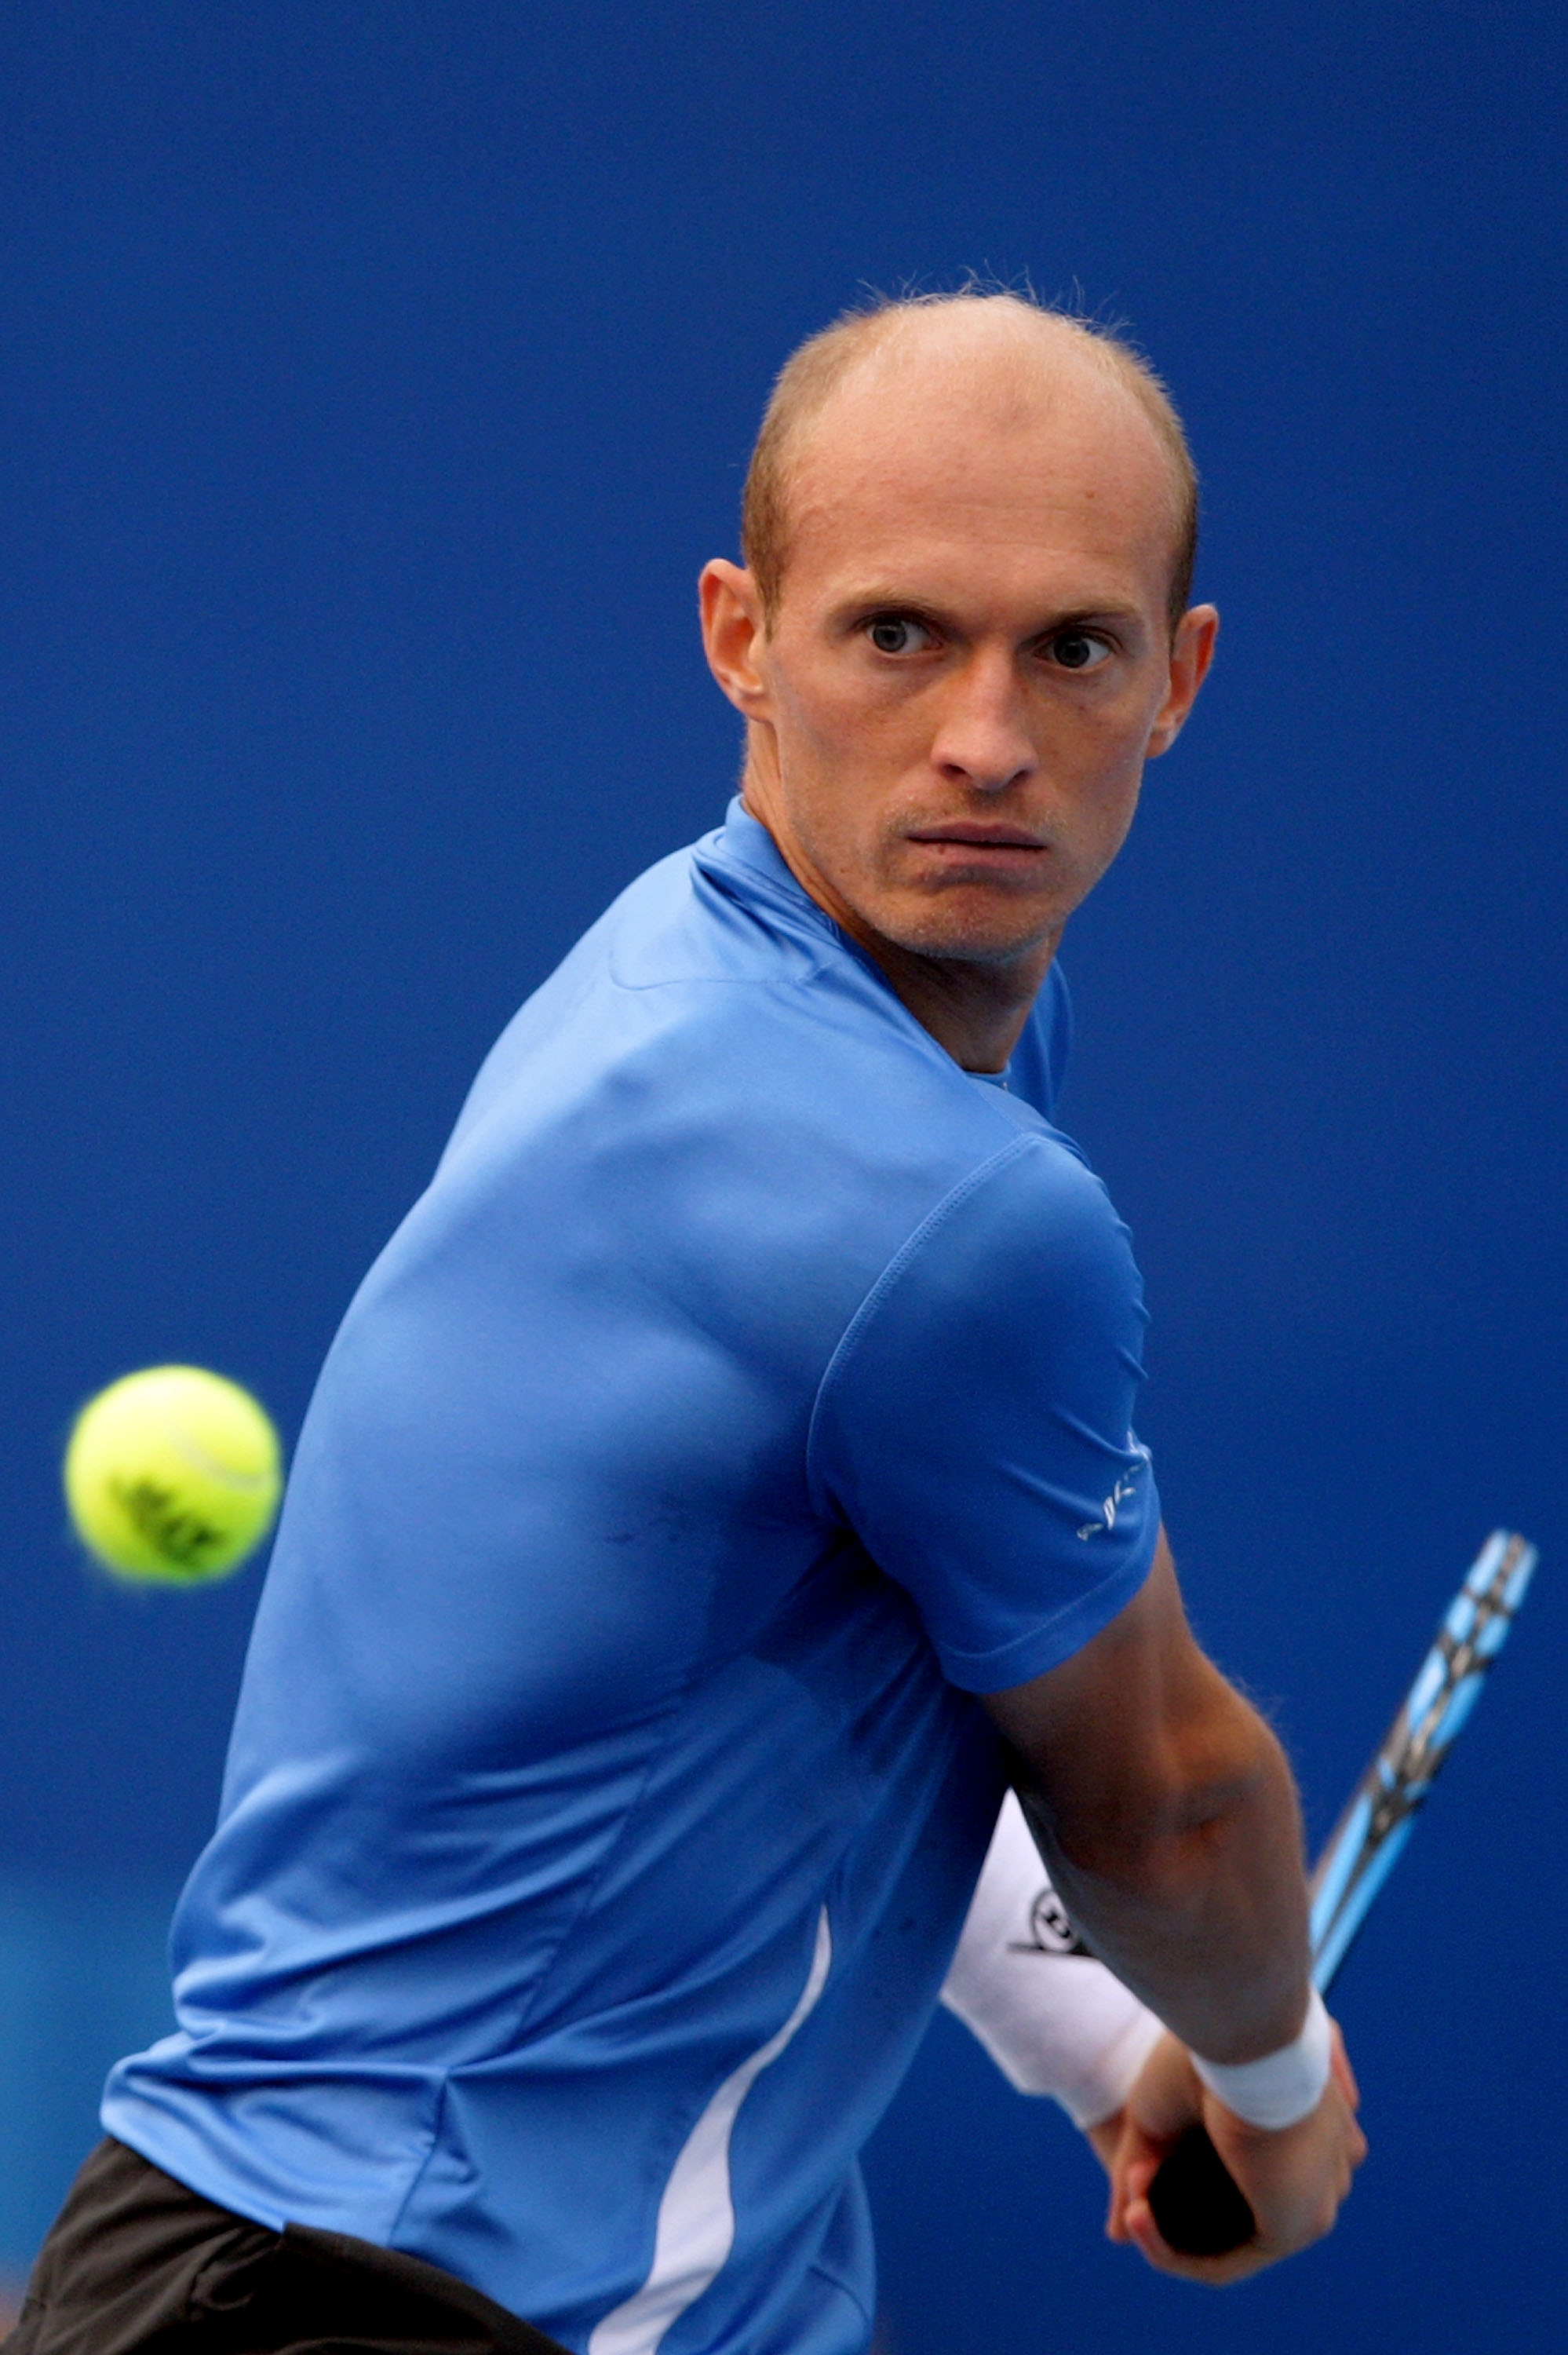 BEIJING - OCTOBER 08:  Nikolay Davydenko of Russia plays a backhand during his match against John Isner of United States  during day eight of the 2010 China Open at the National Tennis Center on October 8, 2010 in Beijing, China.  (Photo by Lintao Zhang/G